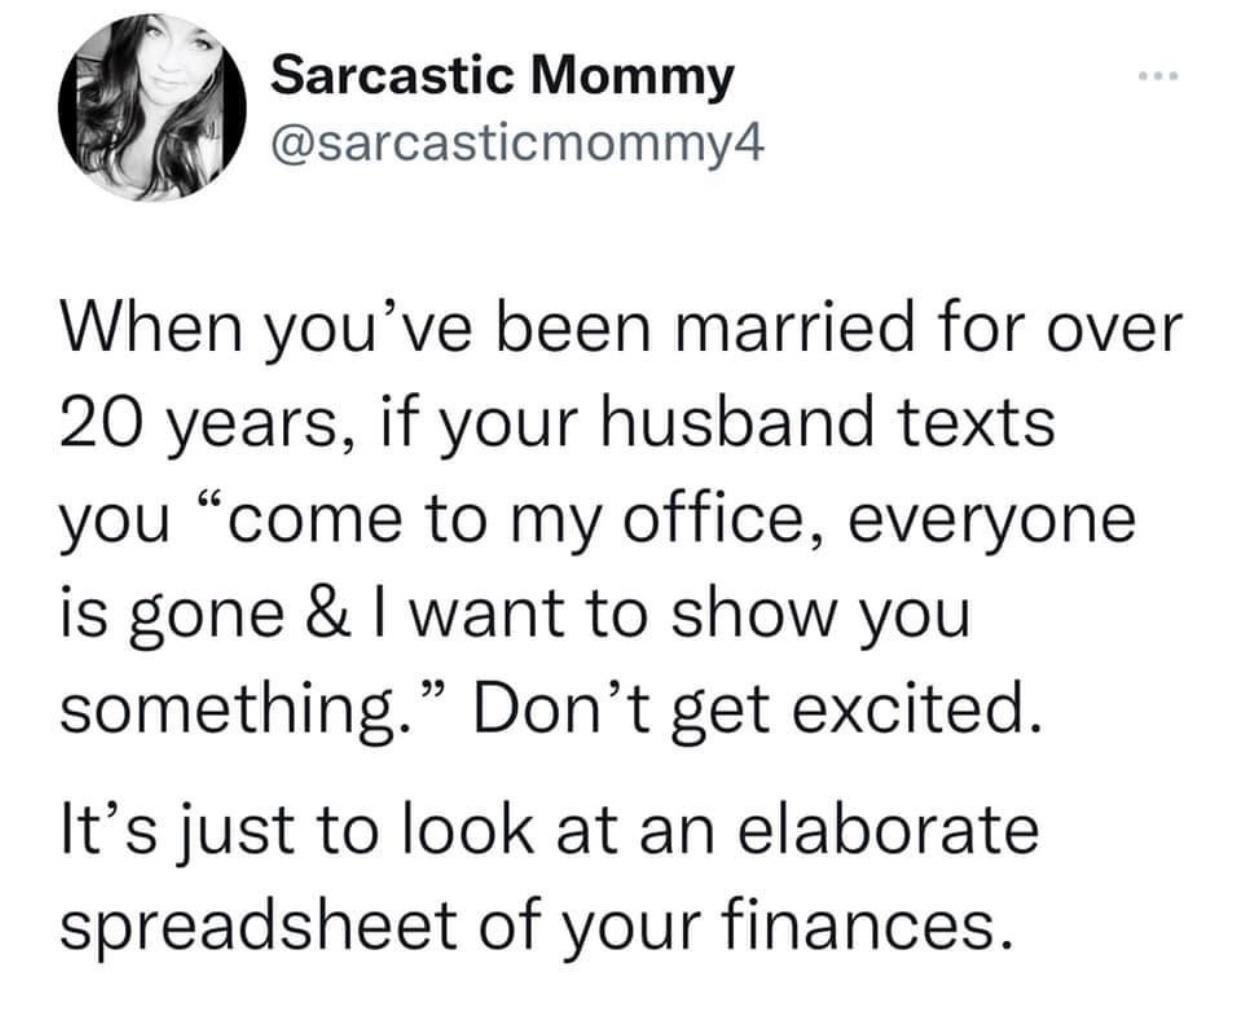 twitter memes - angle - Sarcastic Mommy When you've been married for over 20 years, if your husband texts you come to my office, everyone is gone & I want to show you something." Don't get excited. It's just to look at an elaborate spreadsheet of your fin